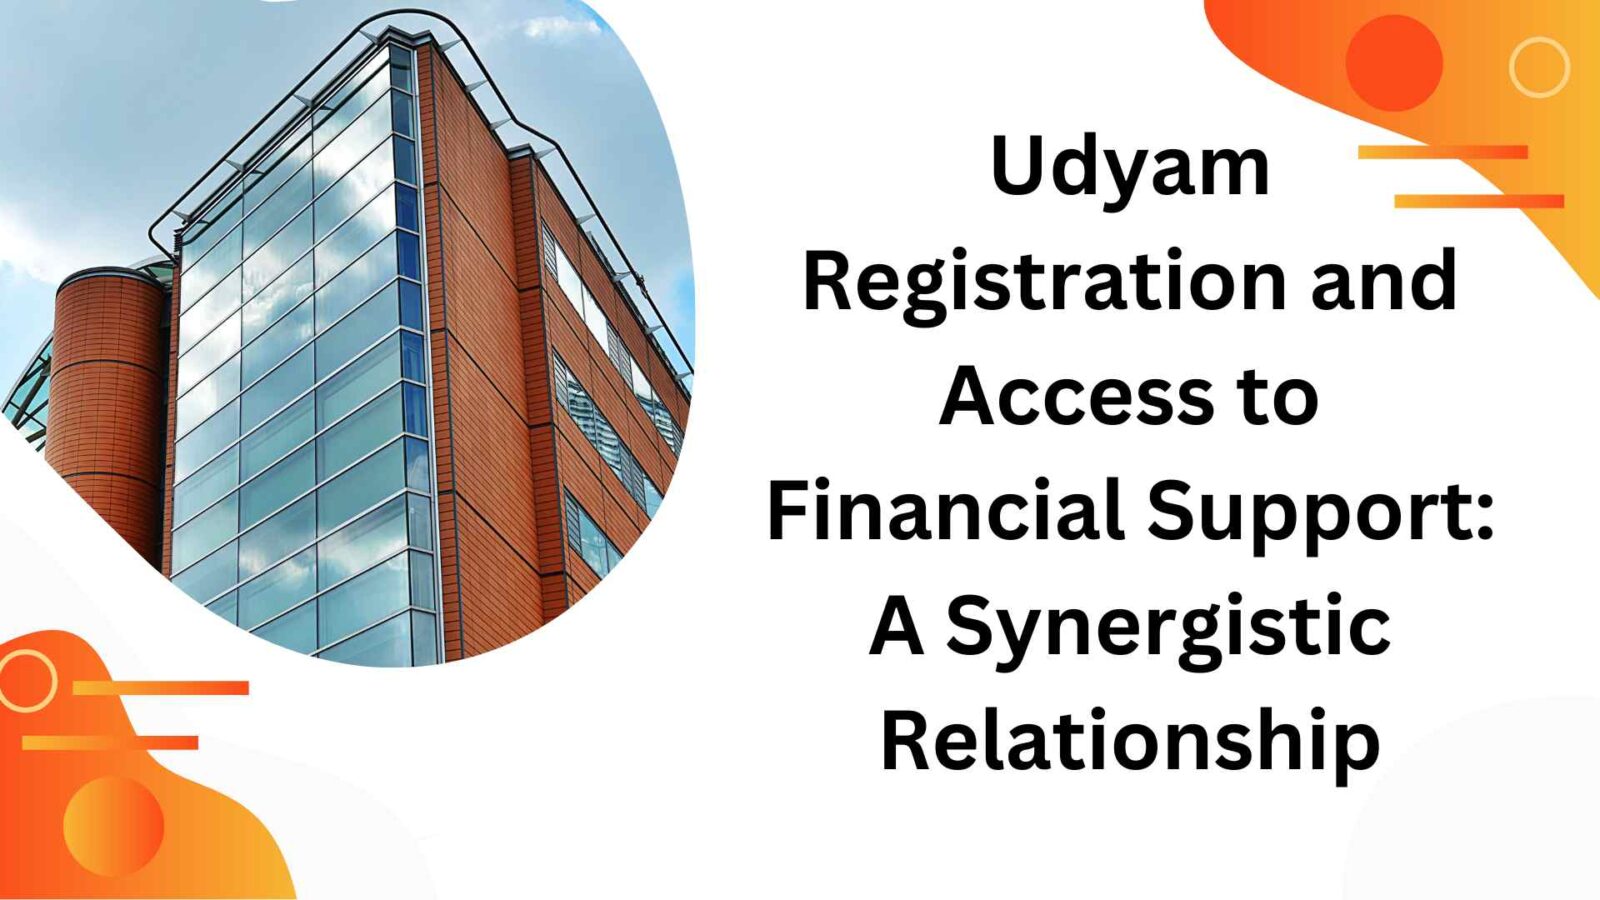 Udyam Registration and Access to Financial Support A Synergistic Relationship